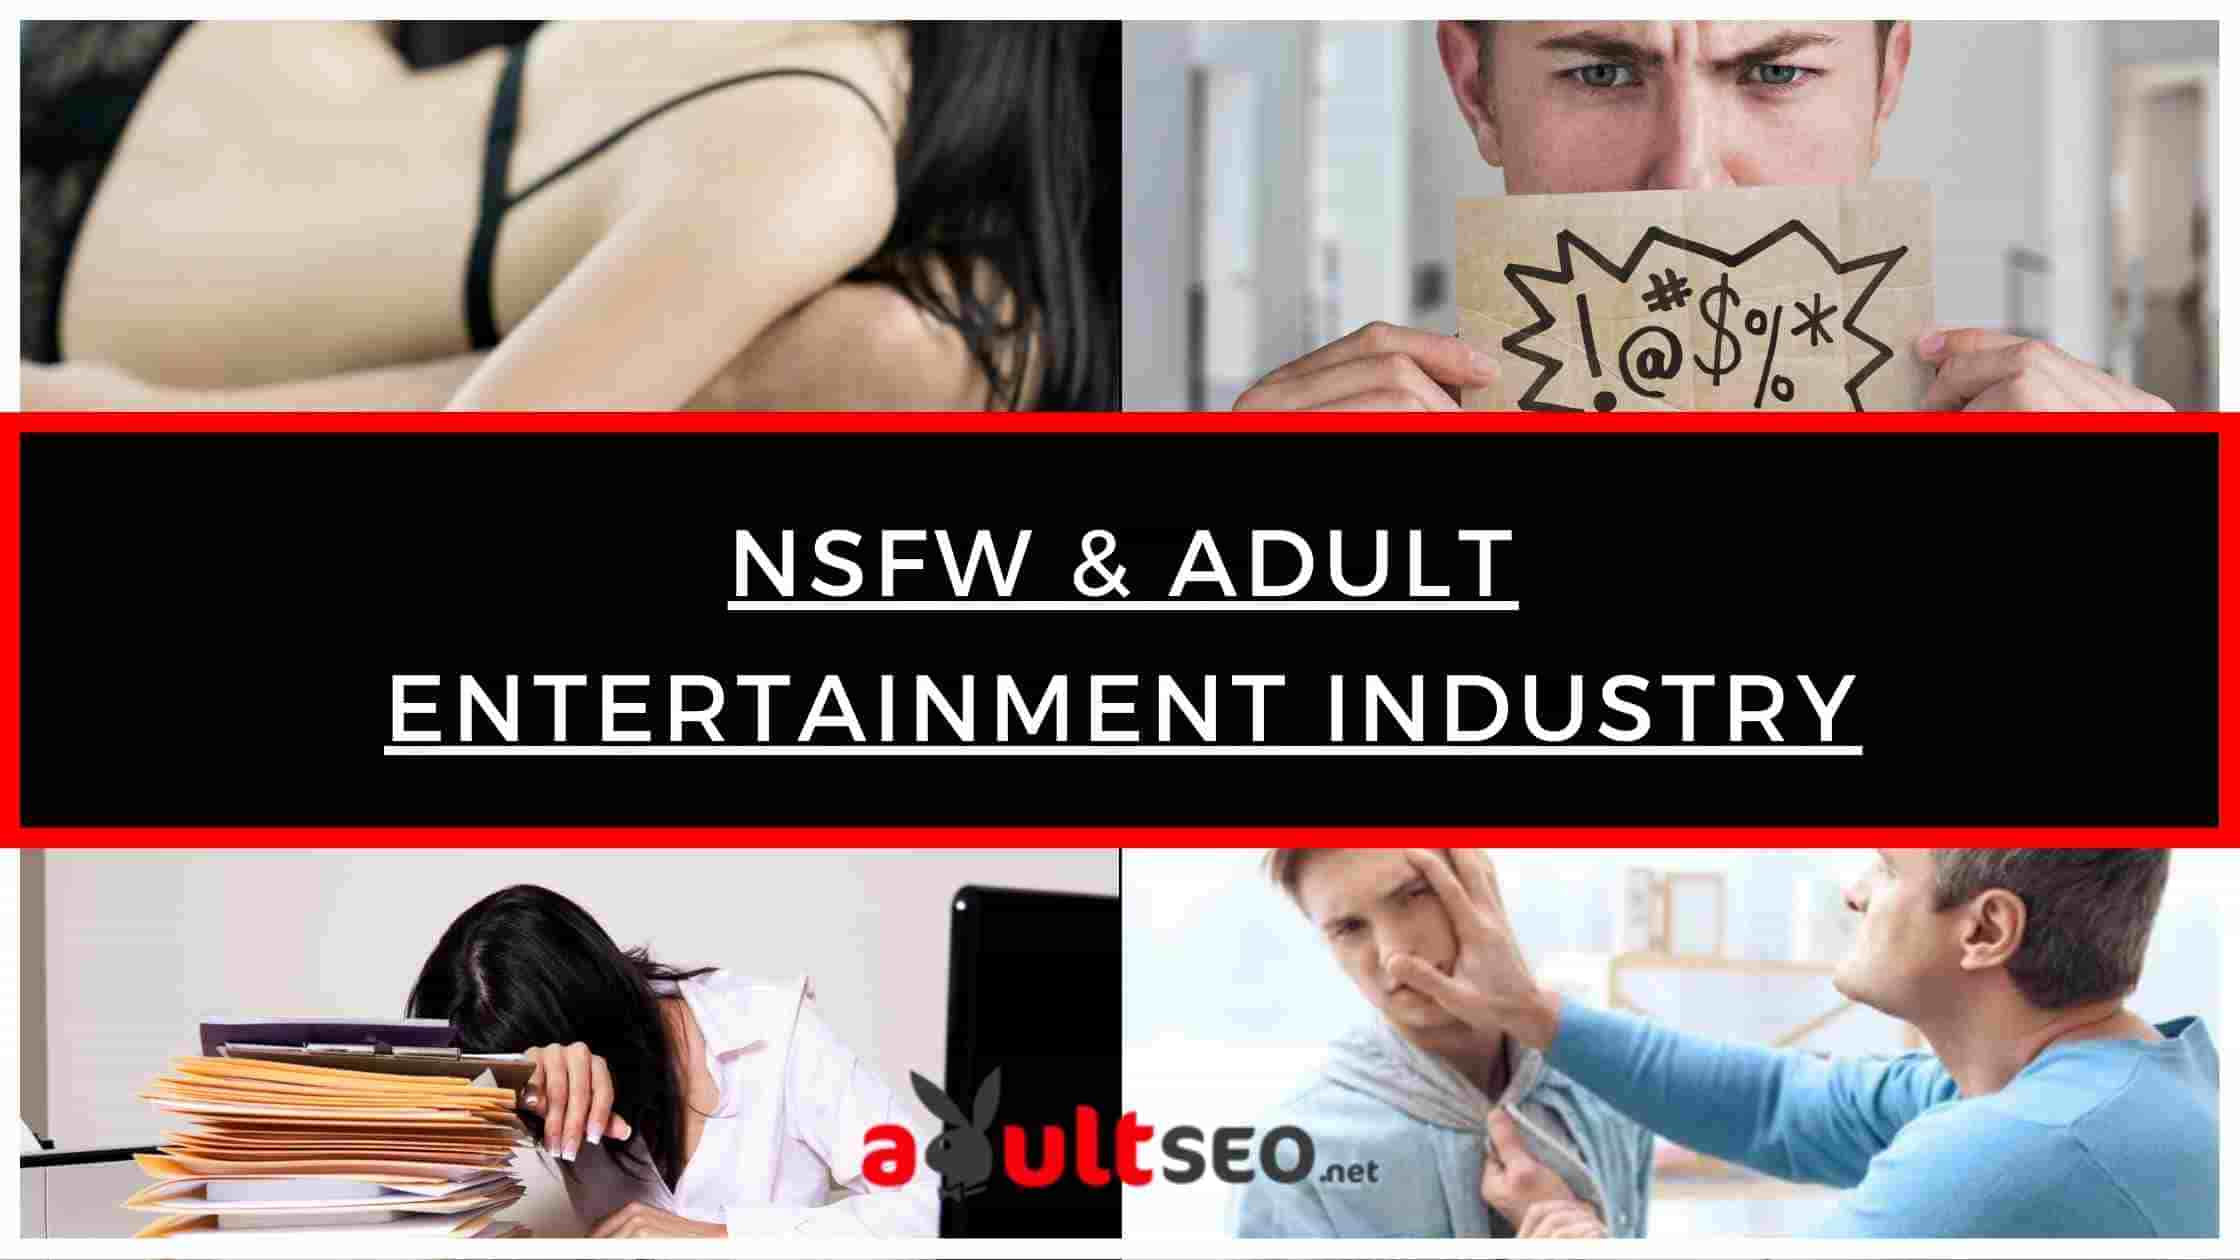 Labeling NSFW and stating its connection with the adult entertainment industry